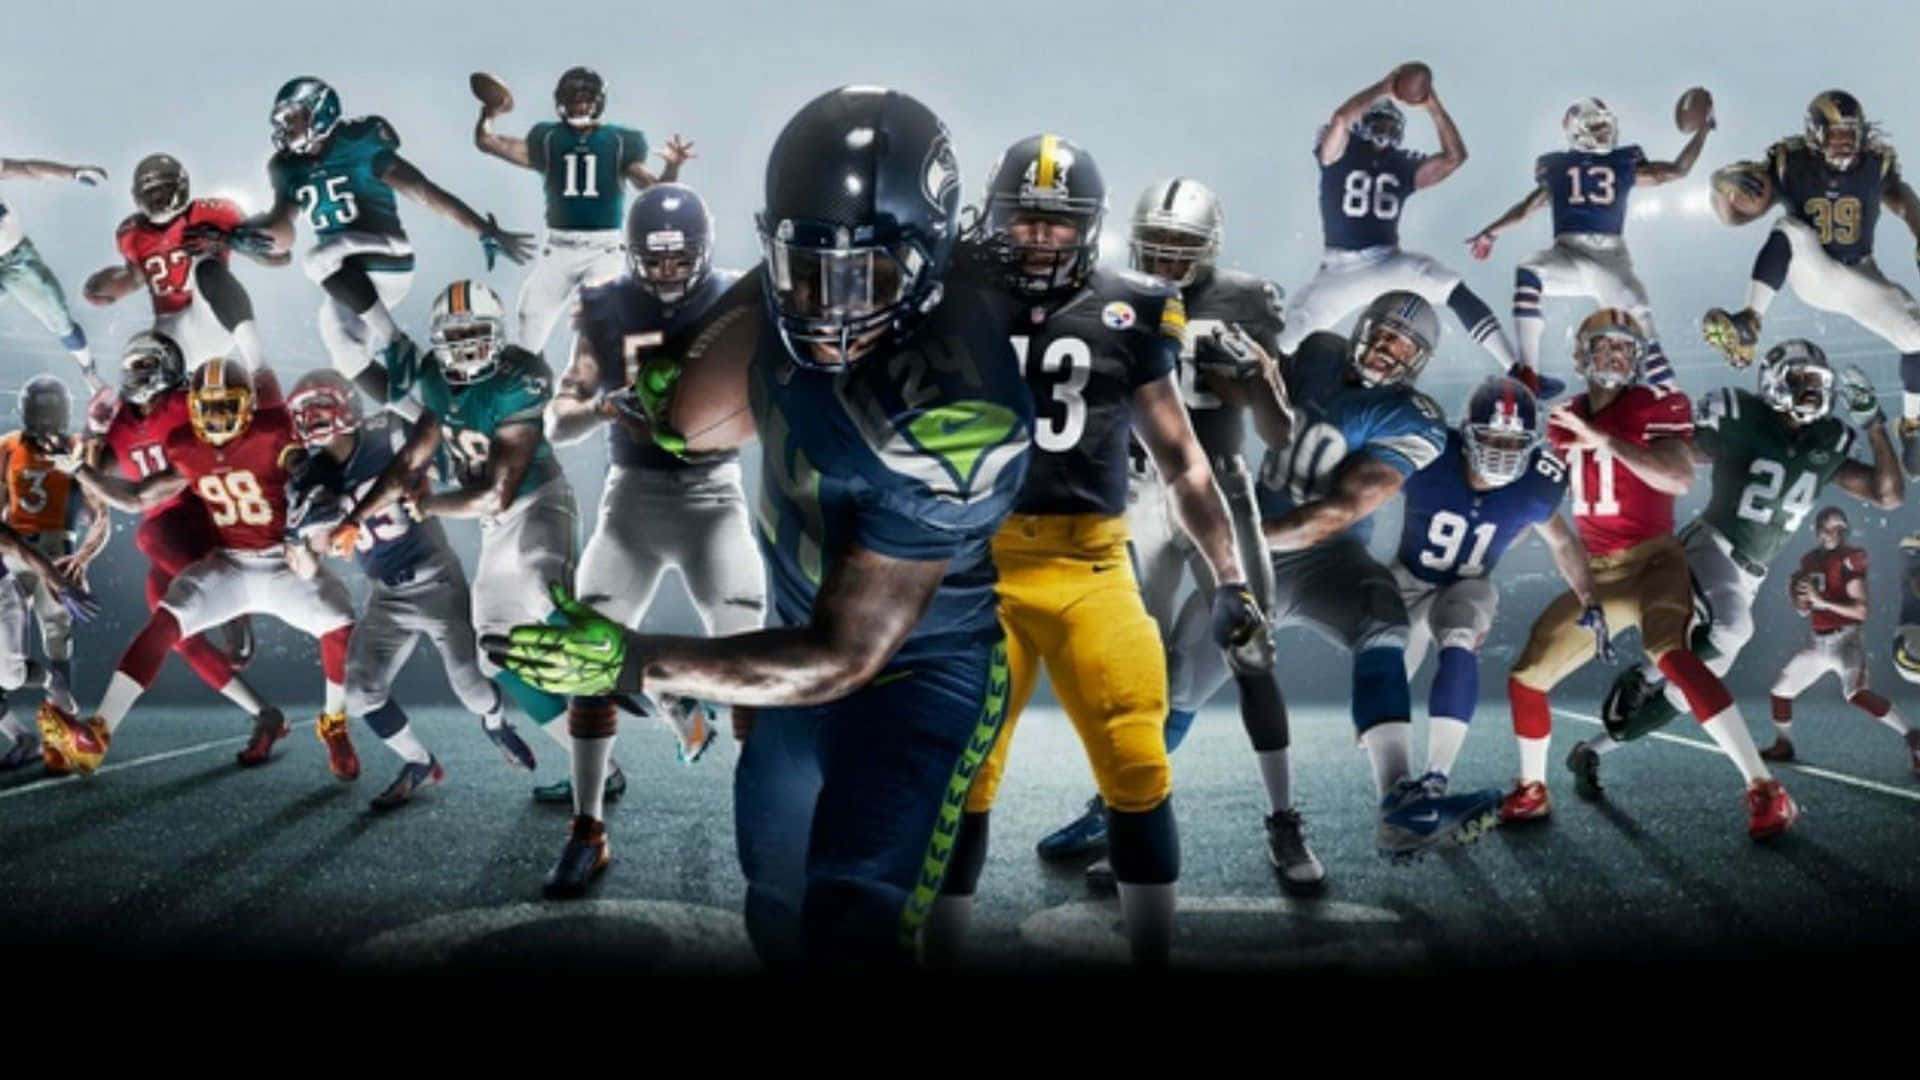 Enjoy The Nfl Action This Season With Hd Quality